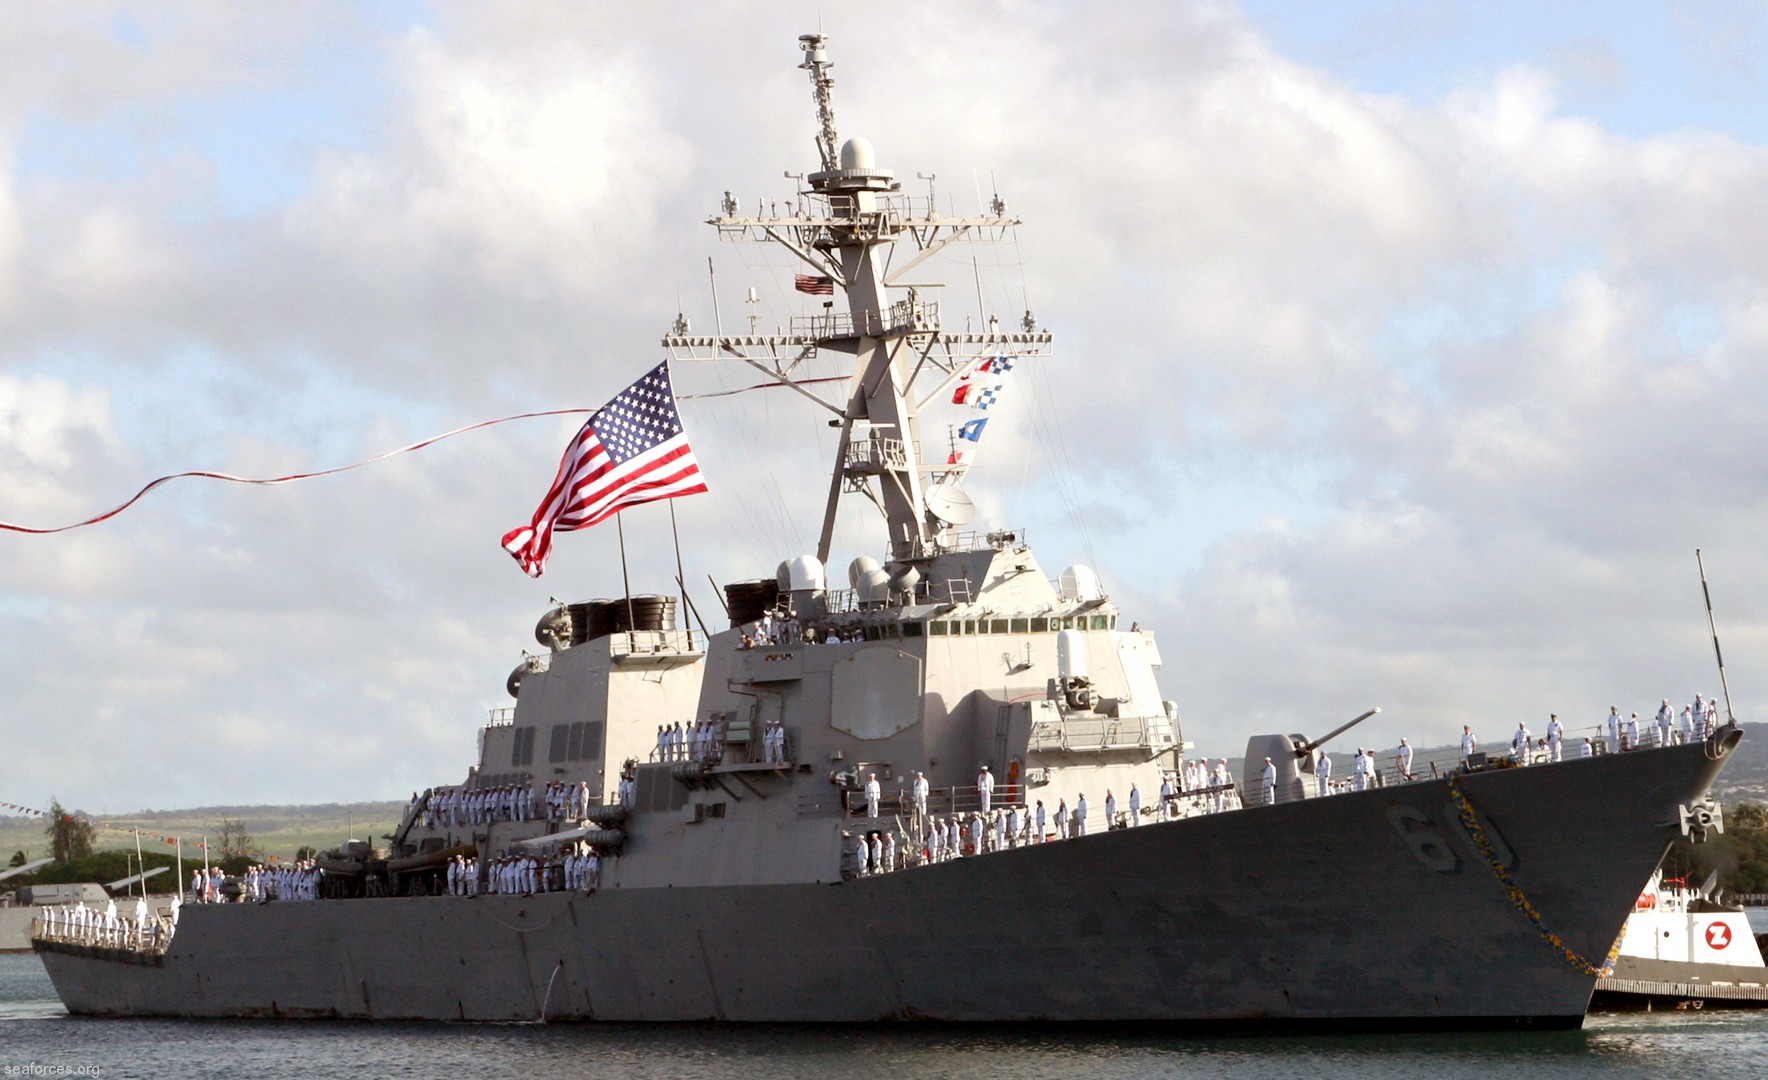 ddg-60 uss paul hamilton guided missile destroyer us navy 44